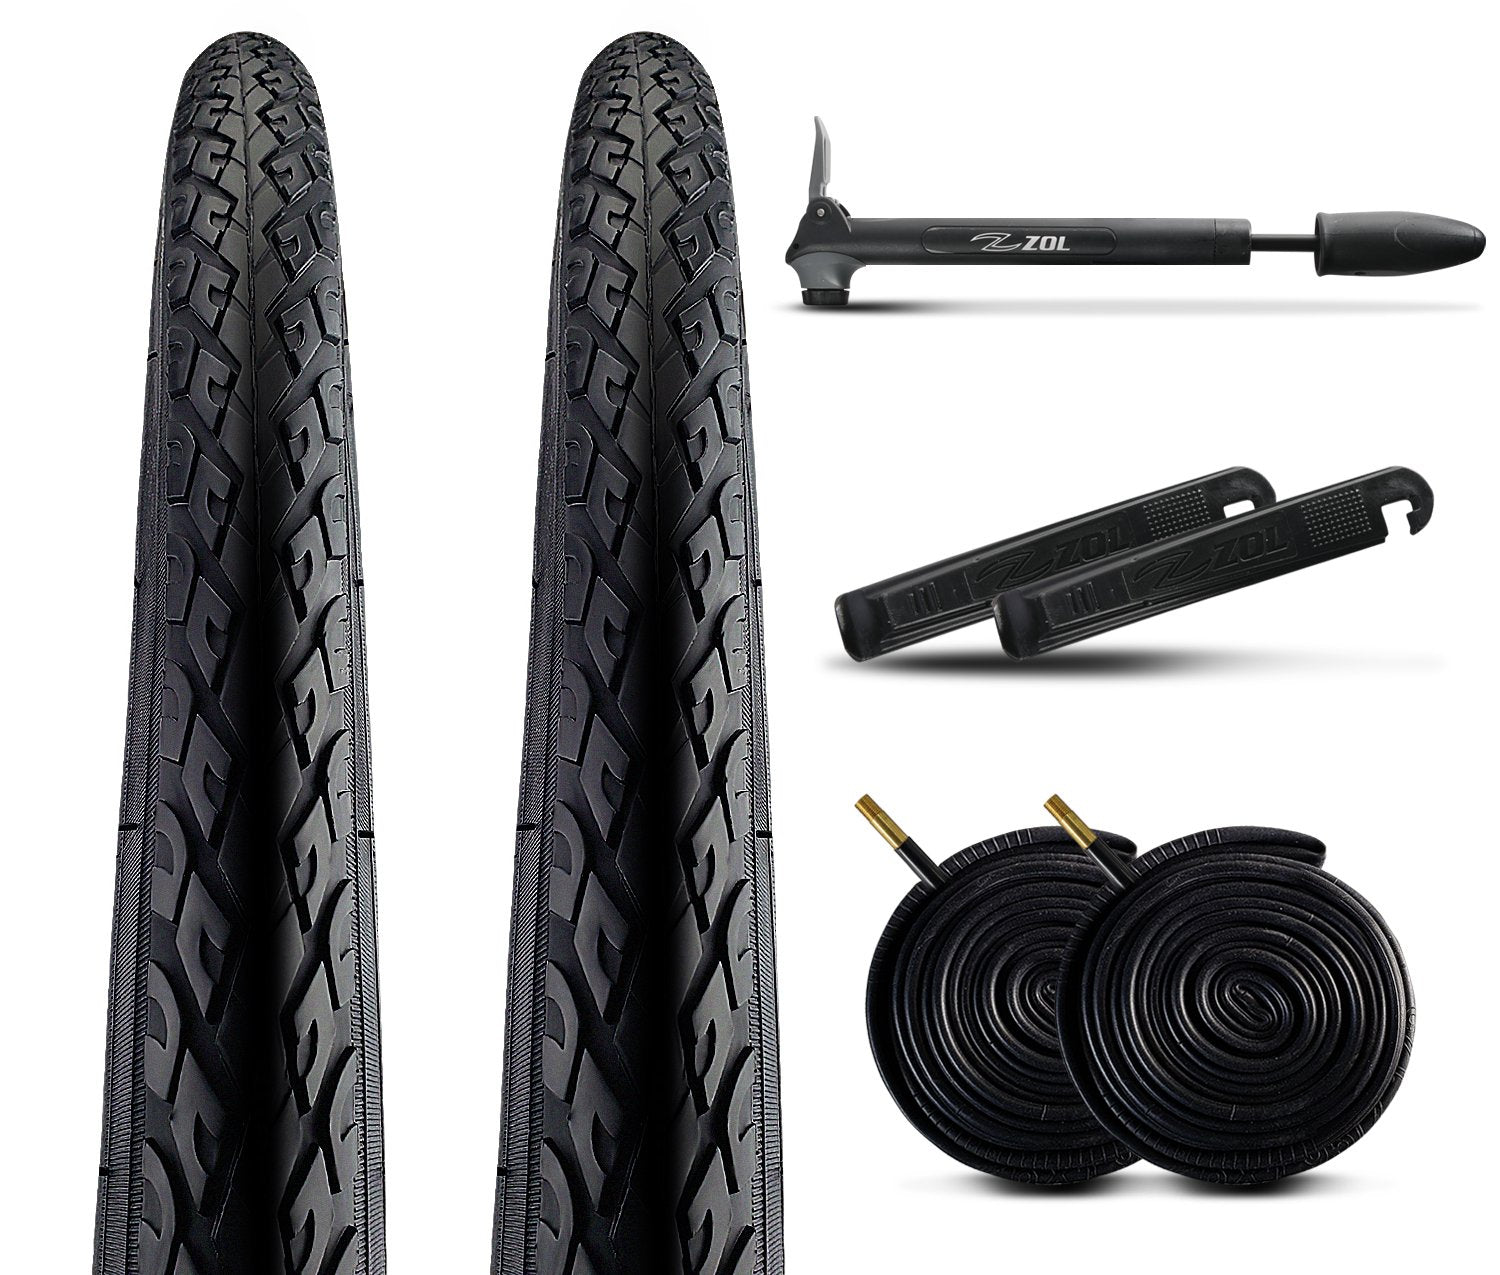 Zol Bundle 2 Pack Road Tires, 2 Bike Tubes 700x38 Schrader, 2 Tire Levers and 1 Zol Mini Pump - Zol Cycling